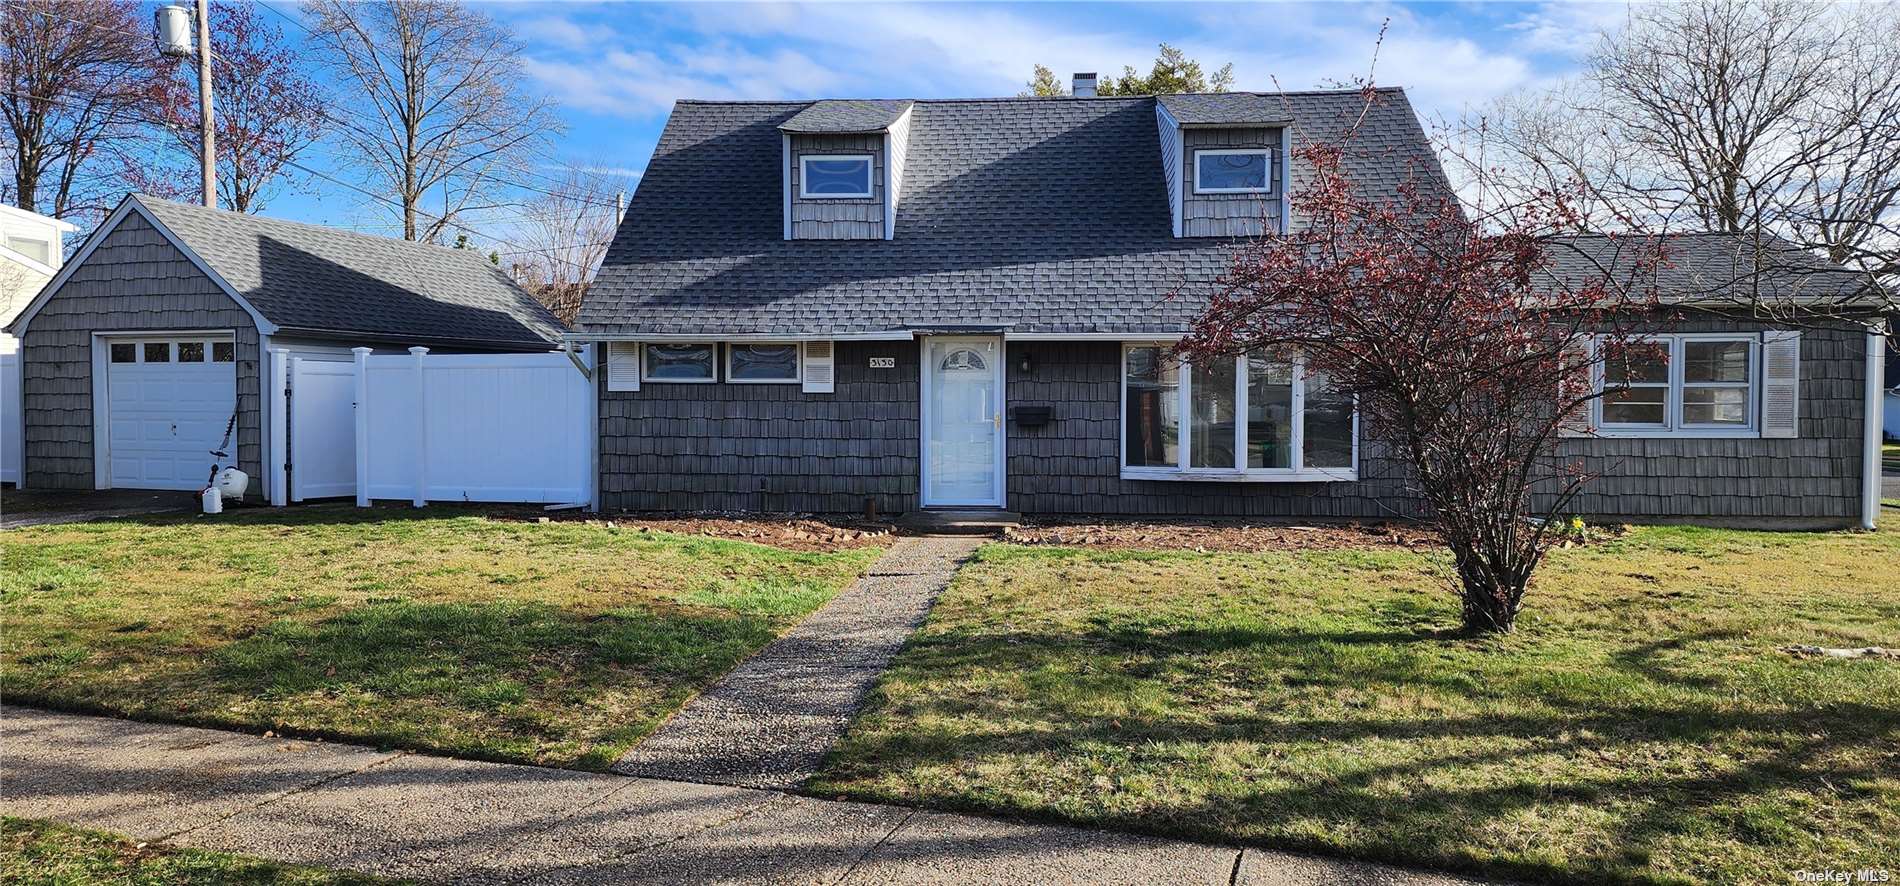 Listing in Levittown, NY